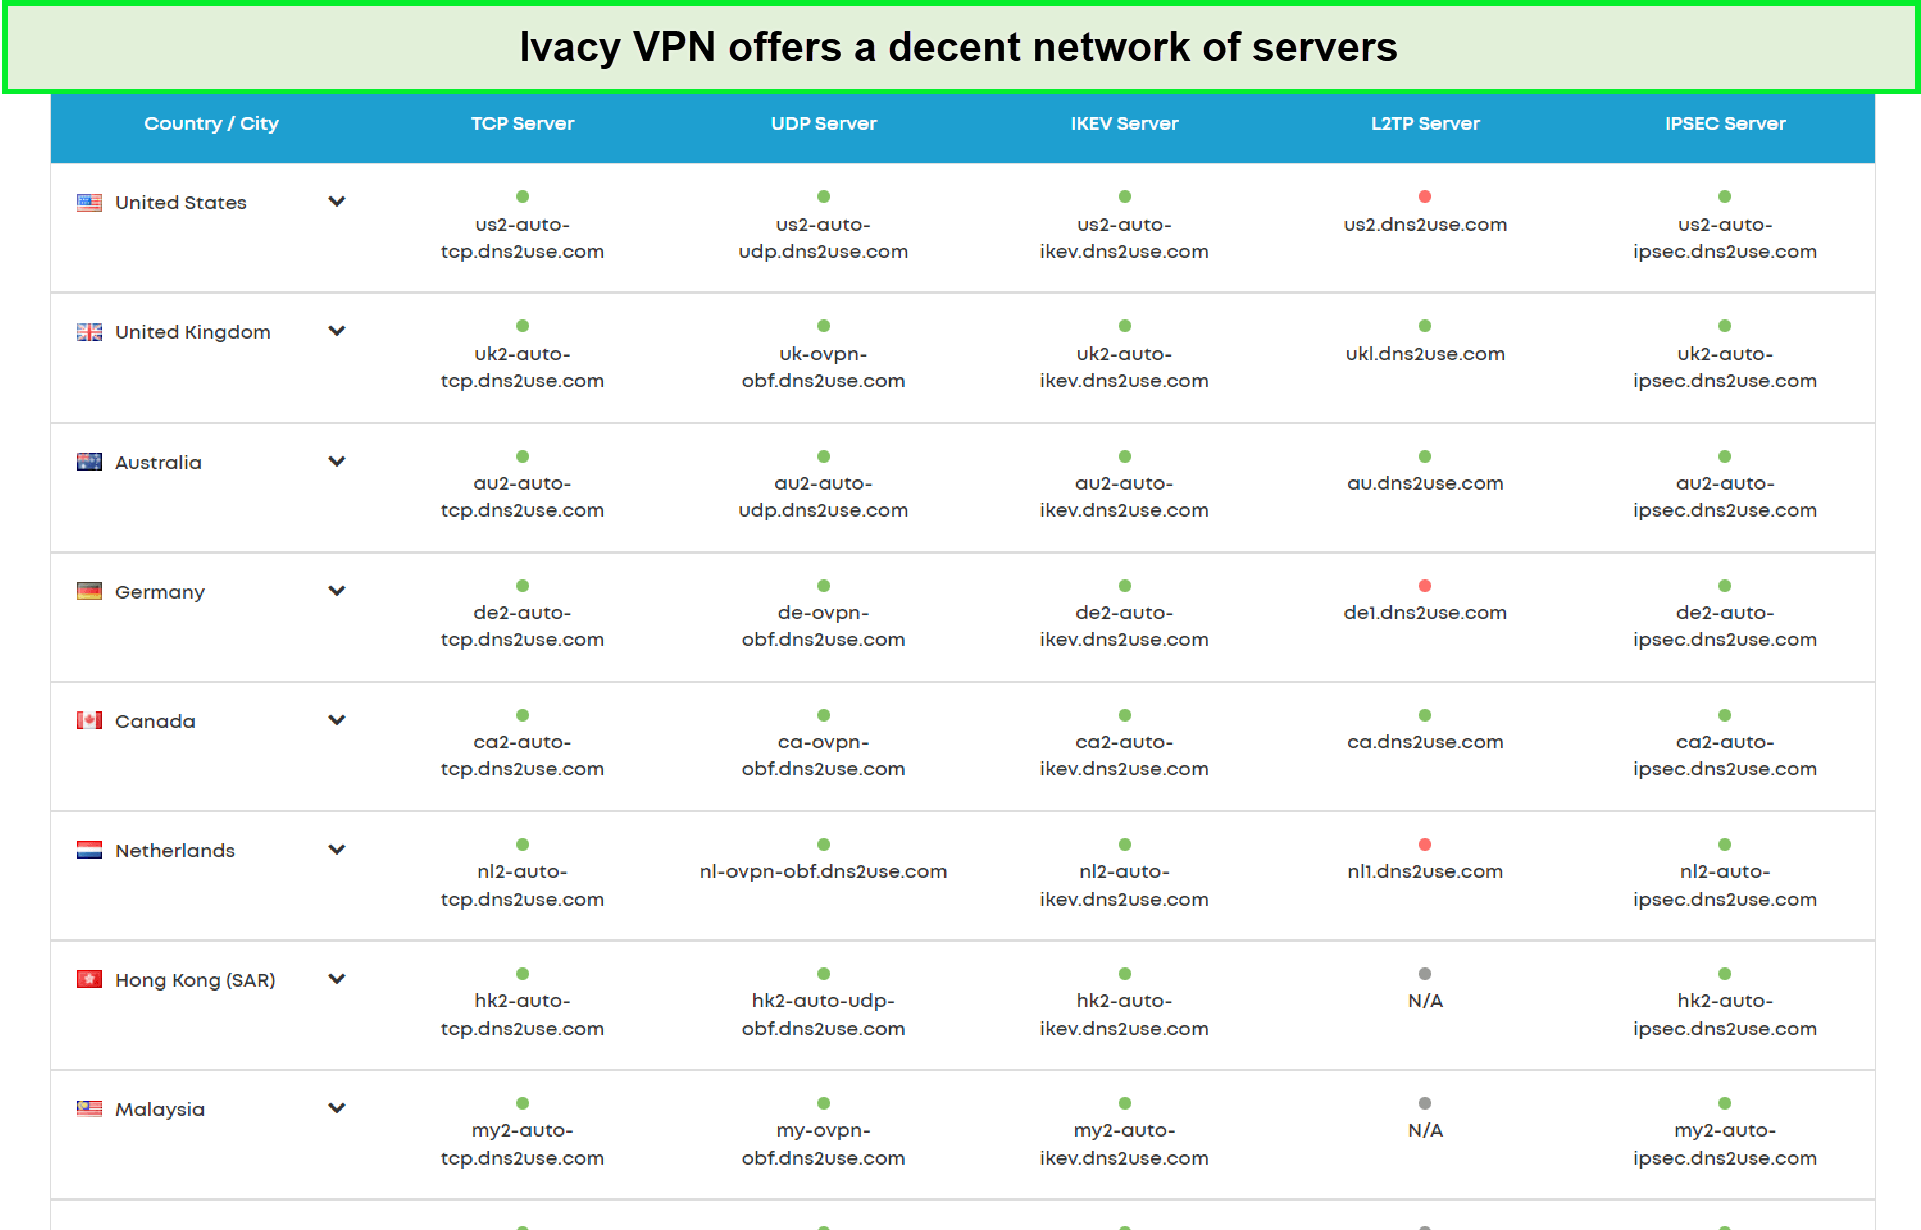 ivacy-server-network-in-Germany